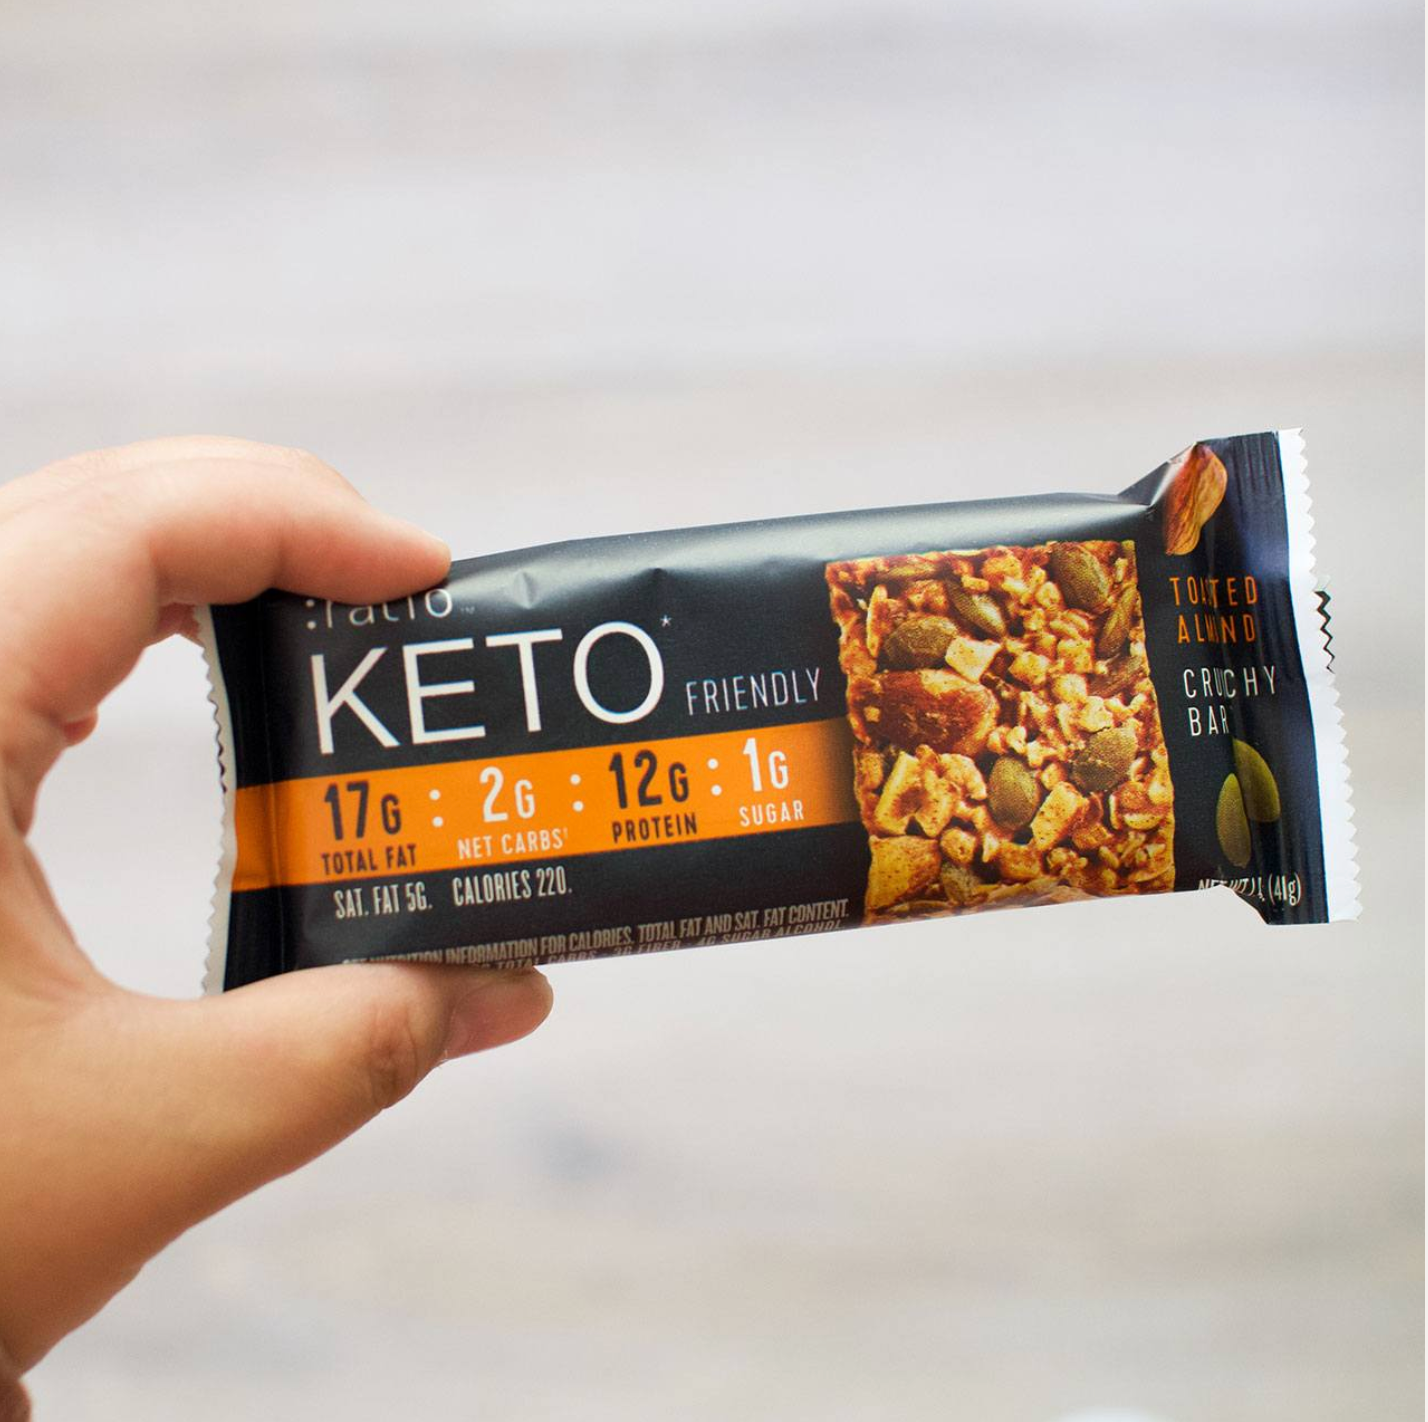 A hand holding a wrapped Ratio KETO Friendly Toasted Almond Crunchy Bar.